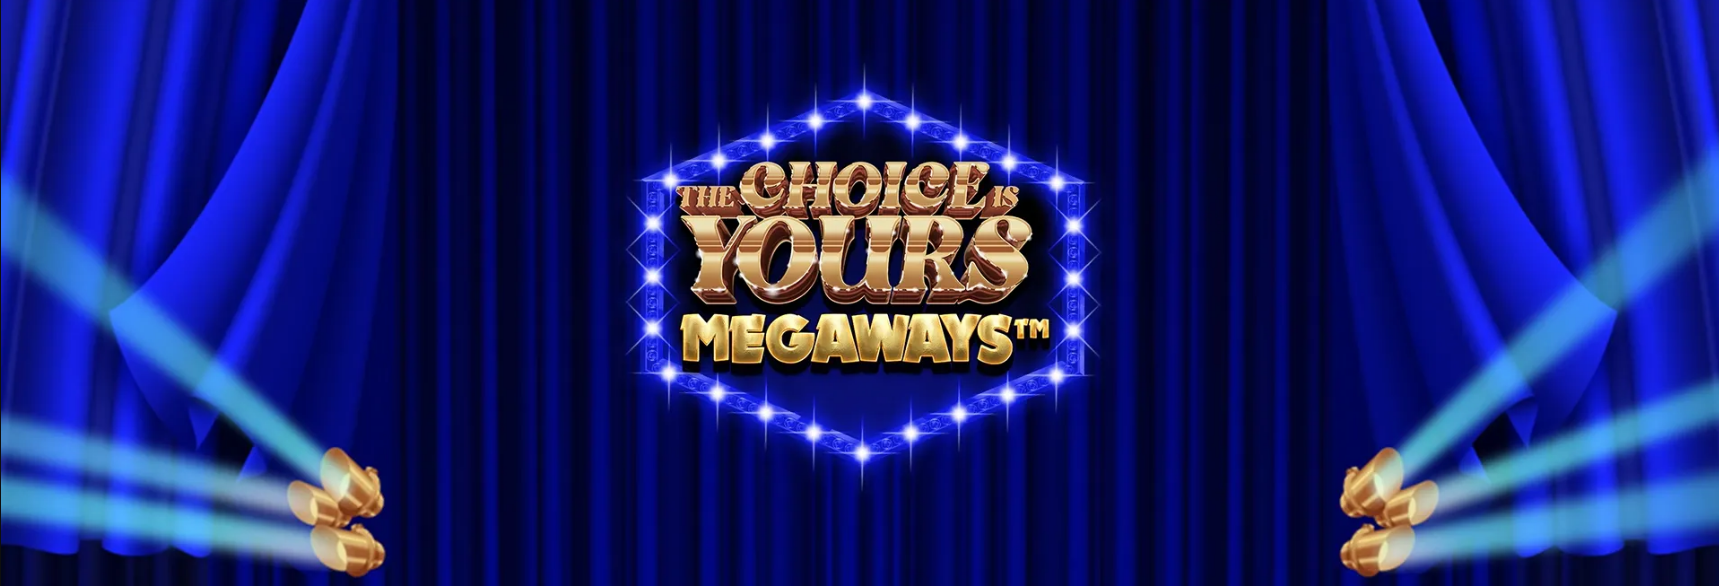 The Choice is yours megaways slot logo